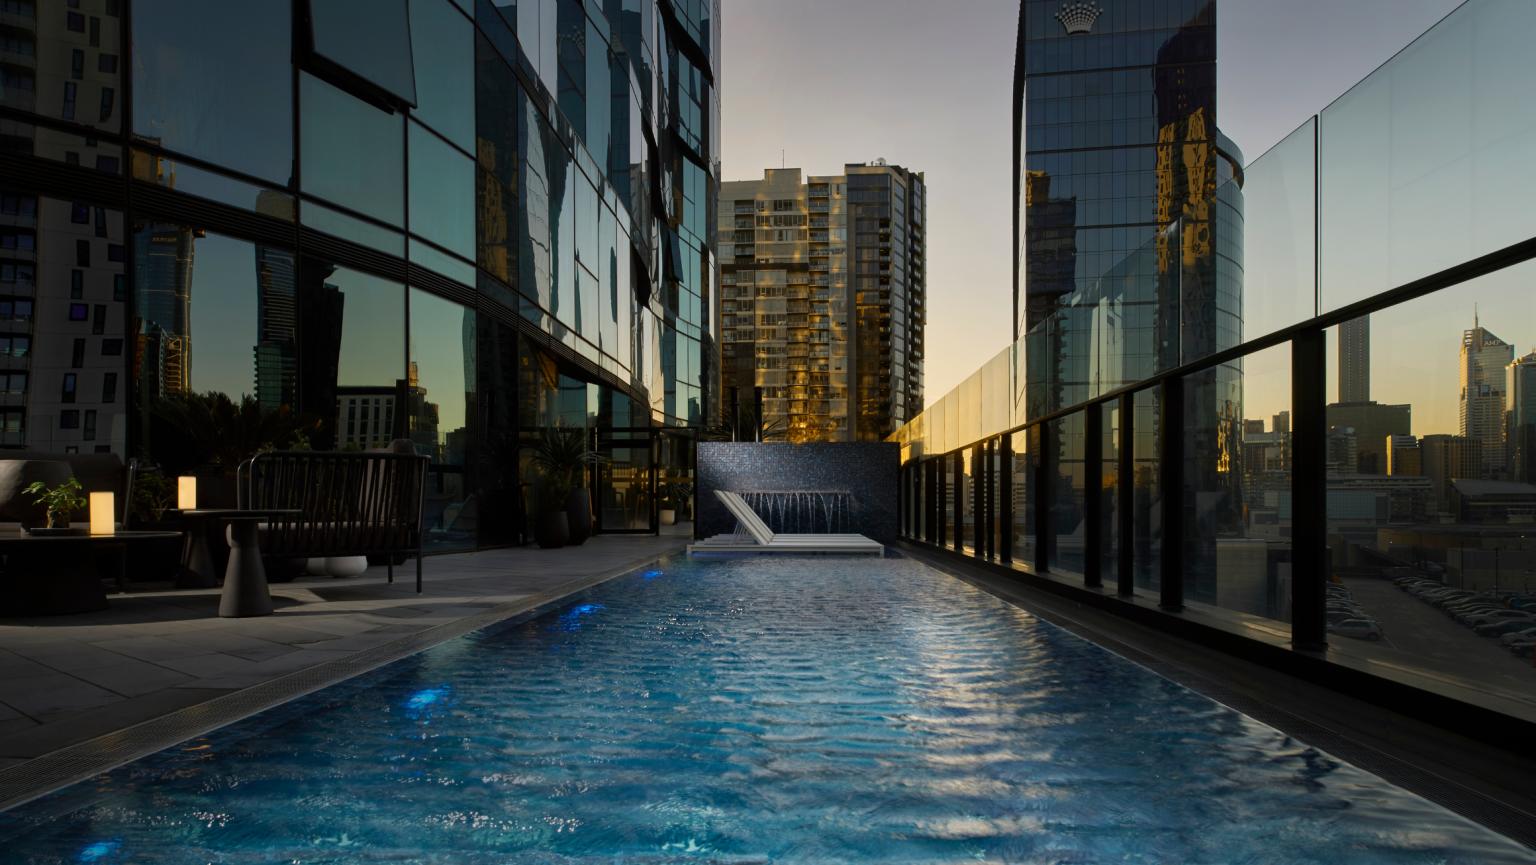 Shadow play exterior shot of the pool at dusk, includes city scape and exterior building 